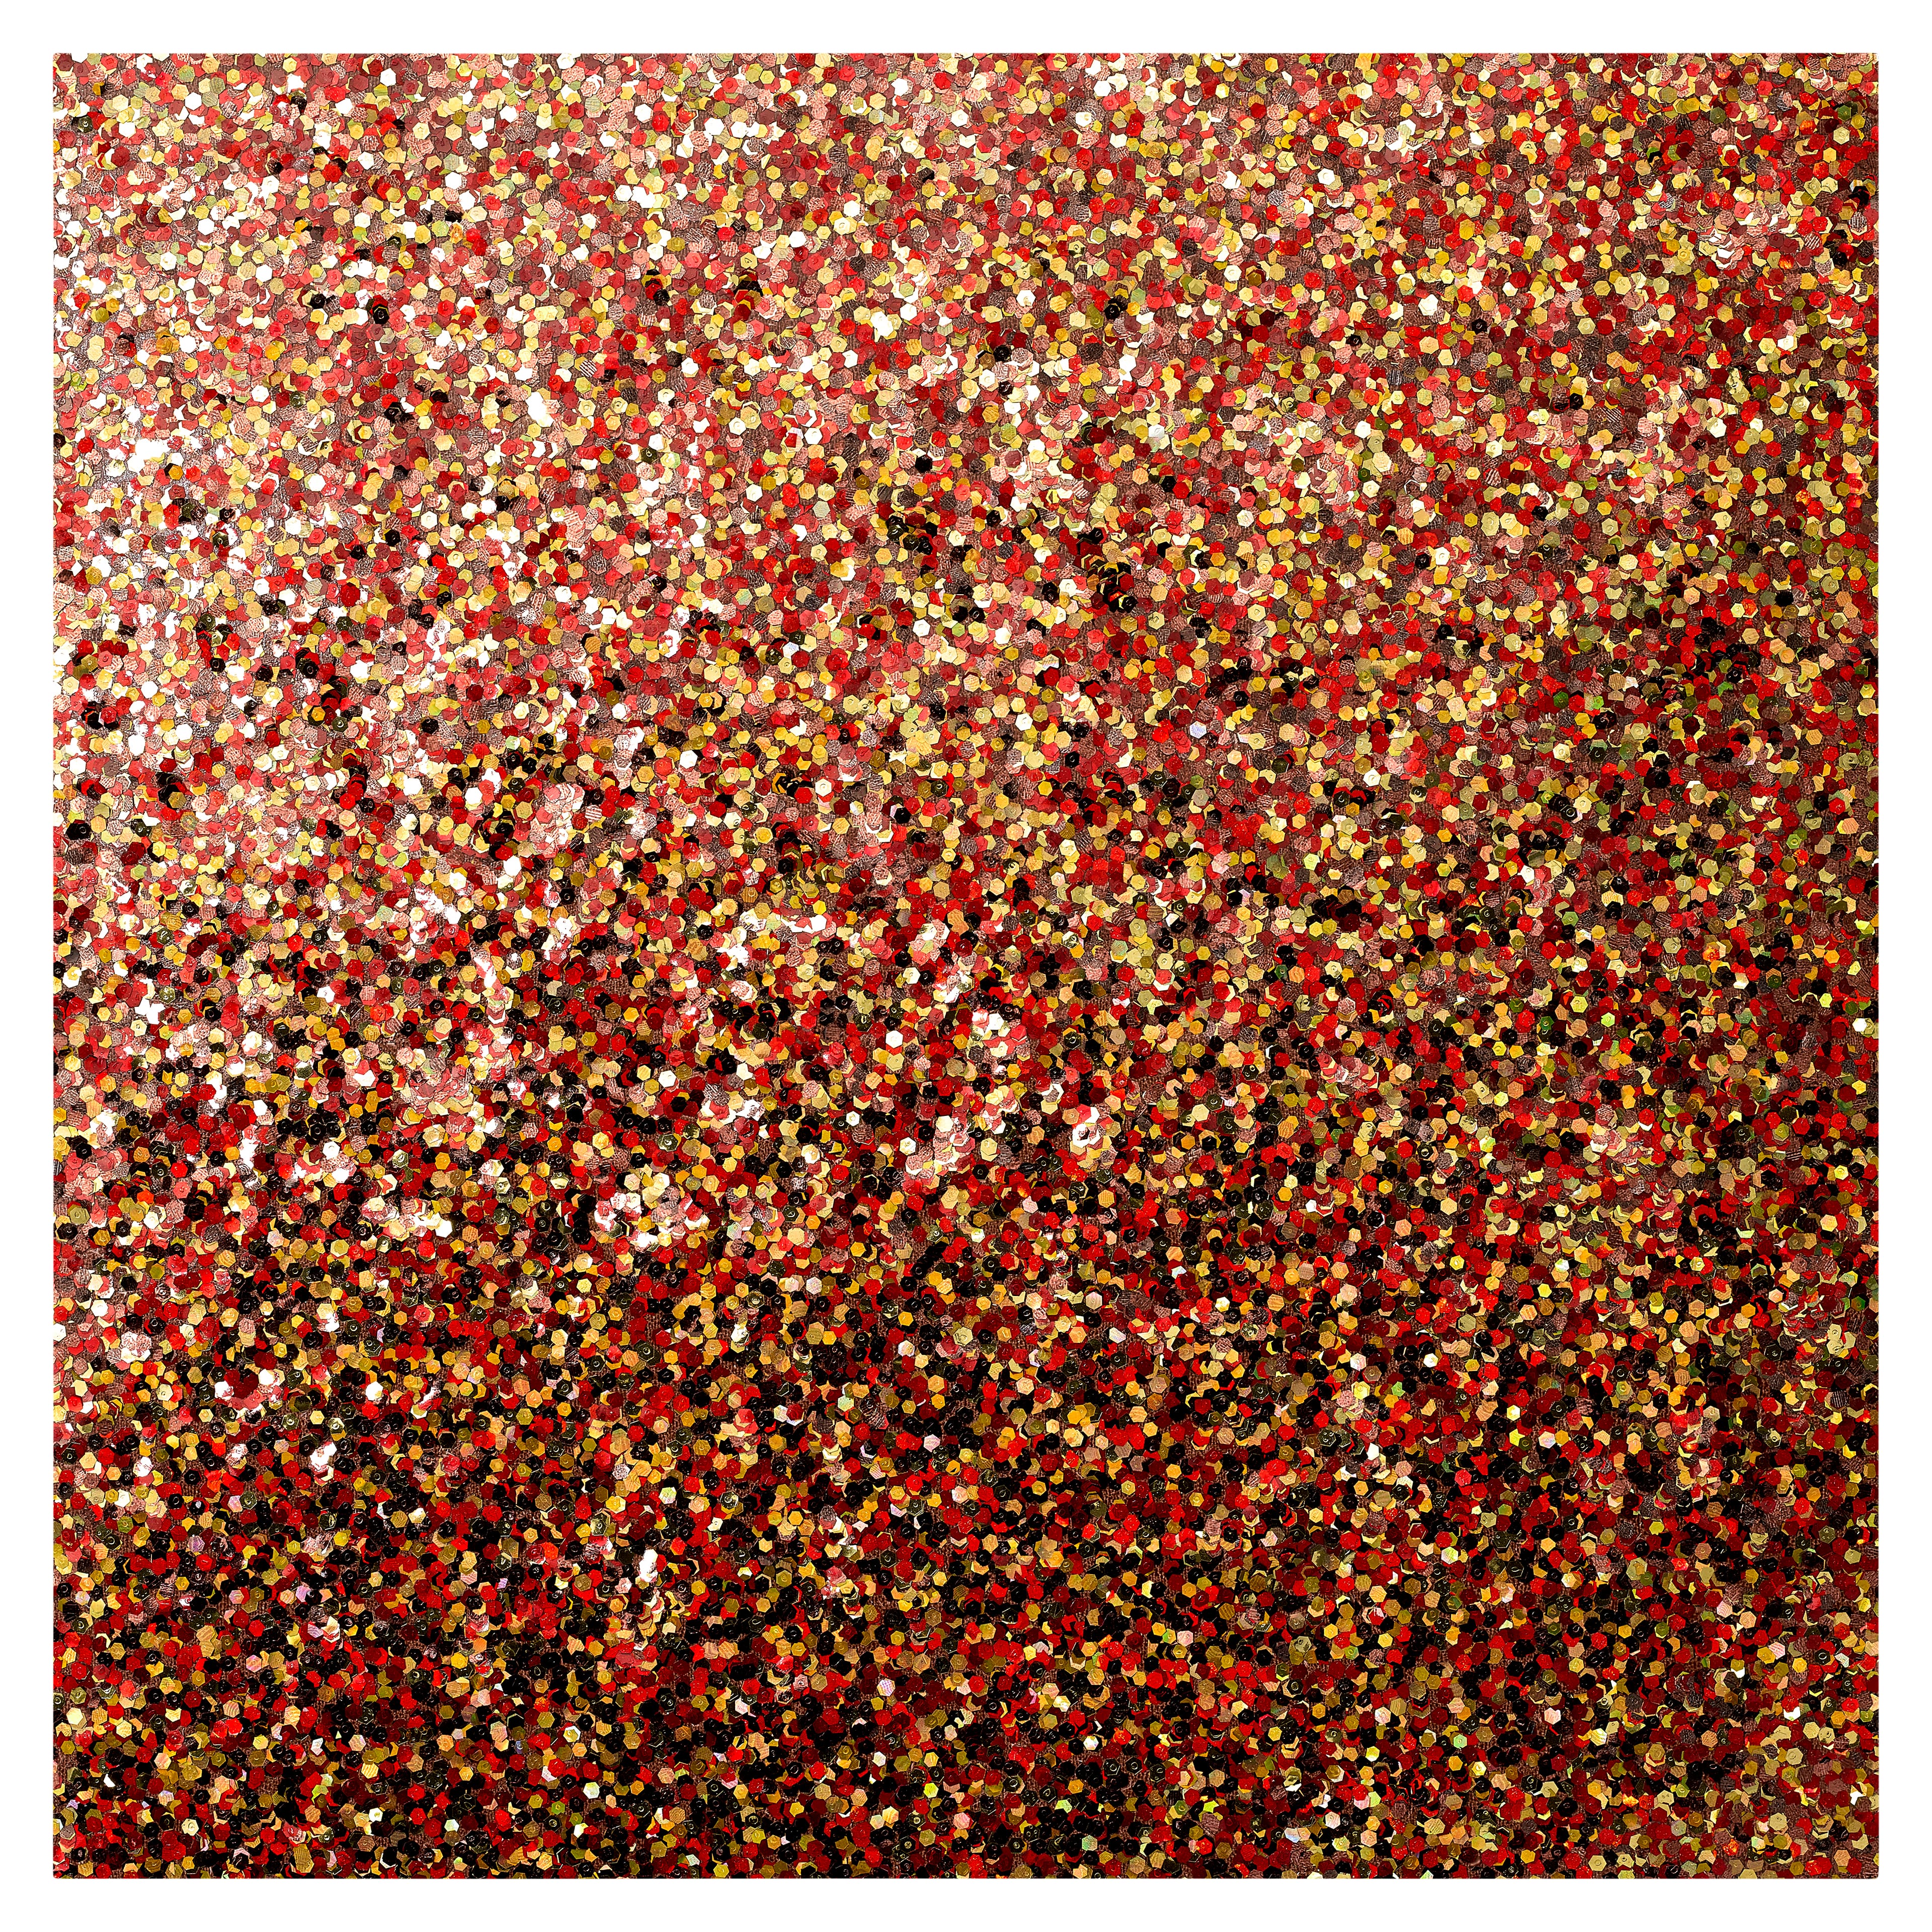 Confetti Glitter Paper by Recollections 12 x 12 | Michaels